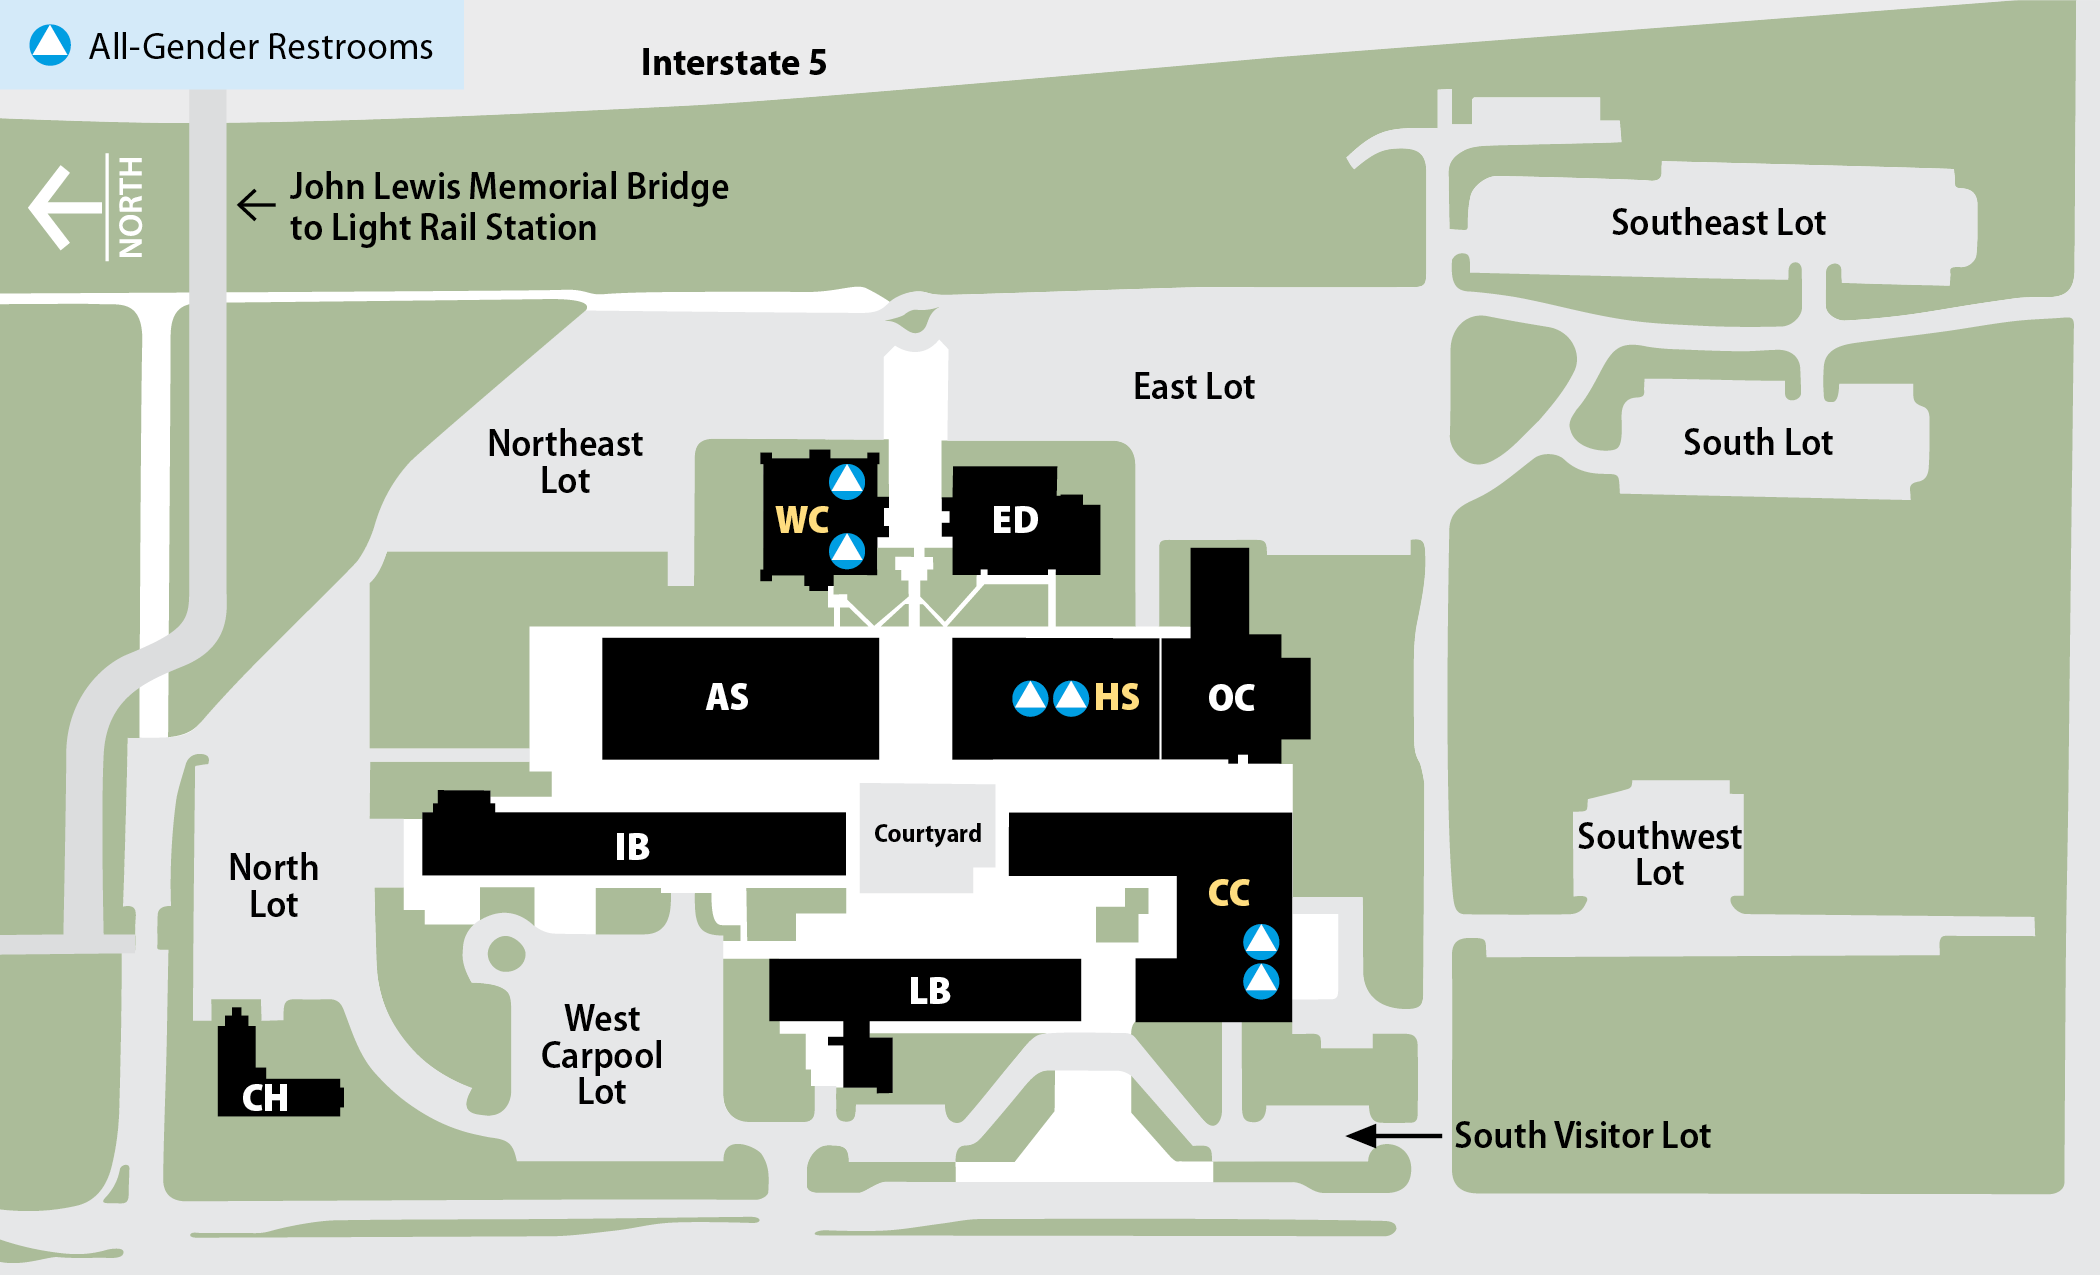 North Seattle College Campus Overview Map - All Gender Restrooms noted in College Center Building, Health Sciences and Student Resouces Building, and Wellness Center. Refer to text above this image detailing locations of restrooms.